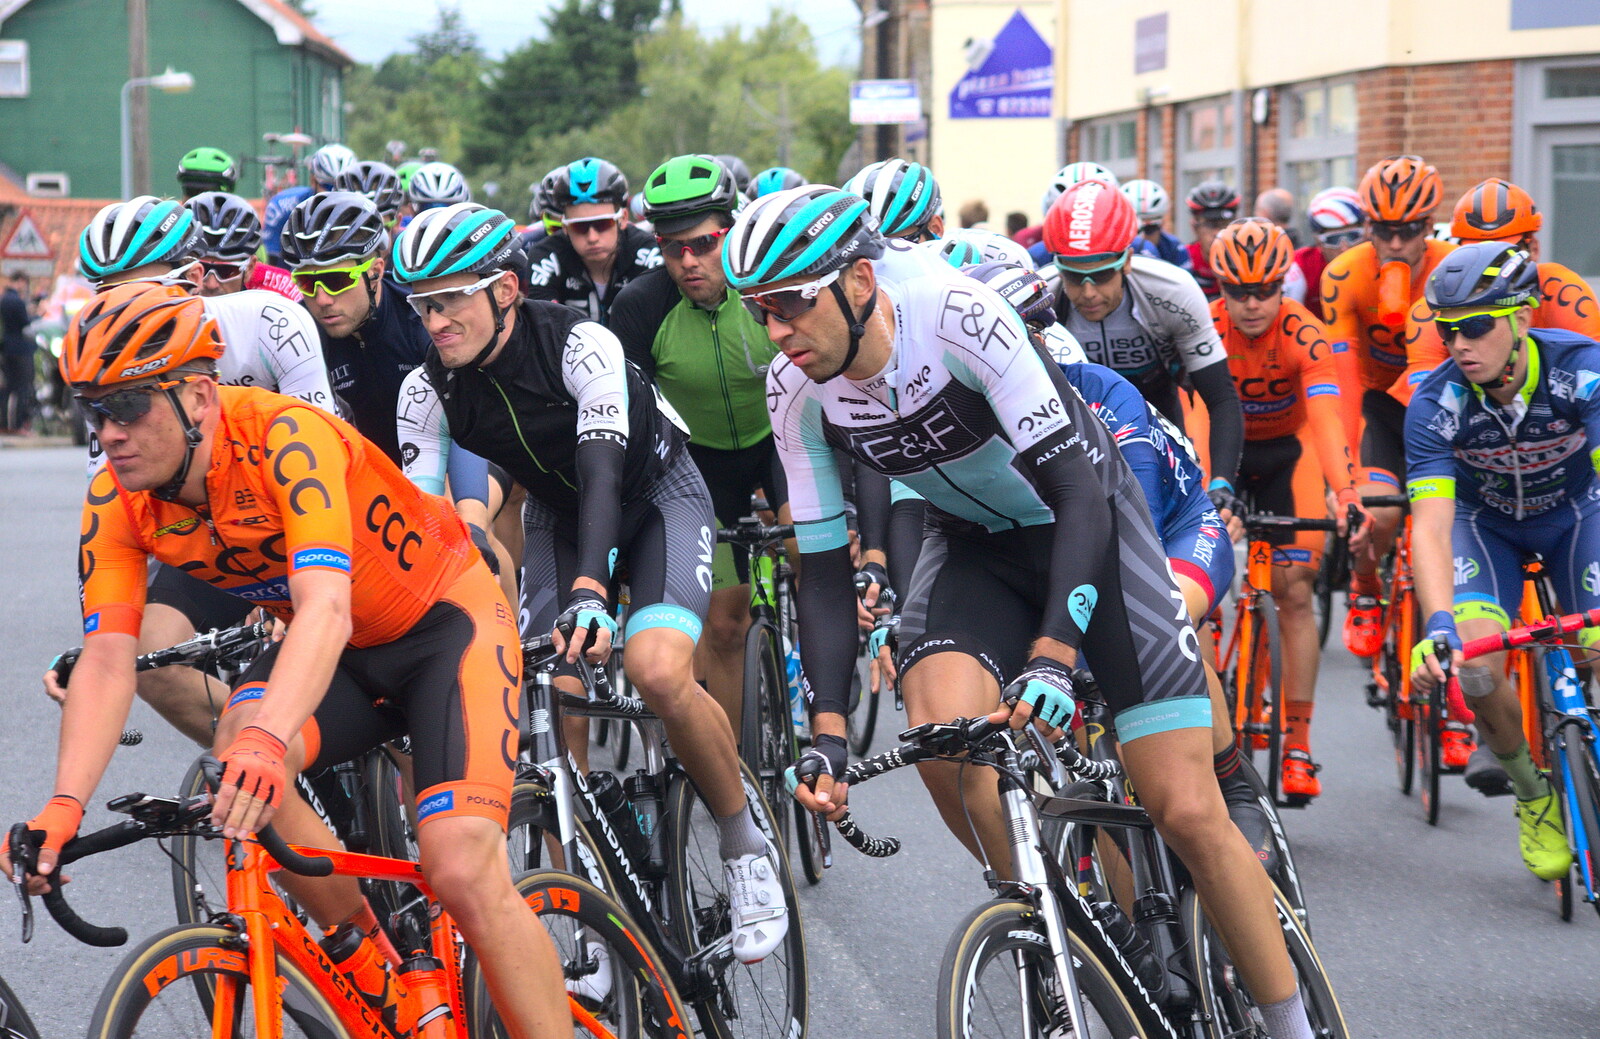 More riders from The Tour of Britain Does Eye, Suffolk - 8th September 2017